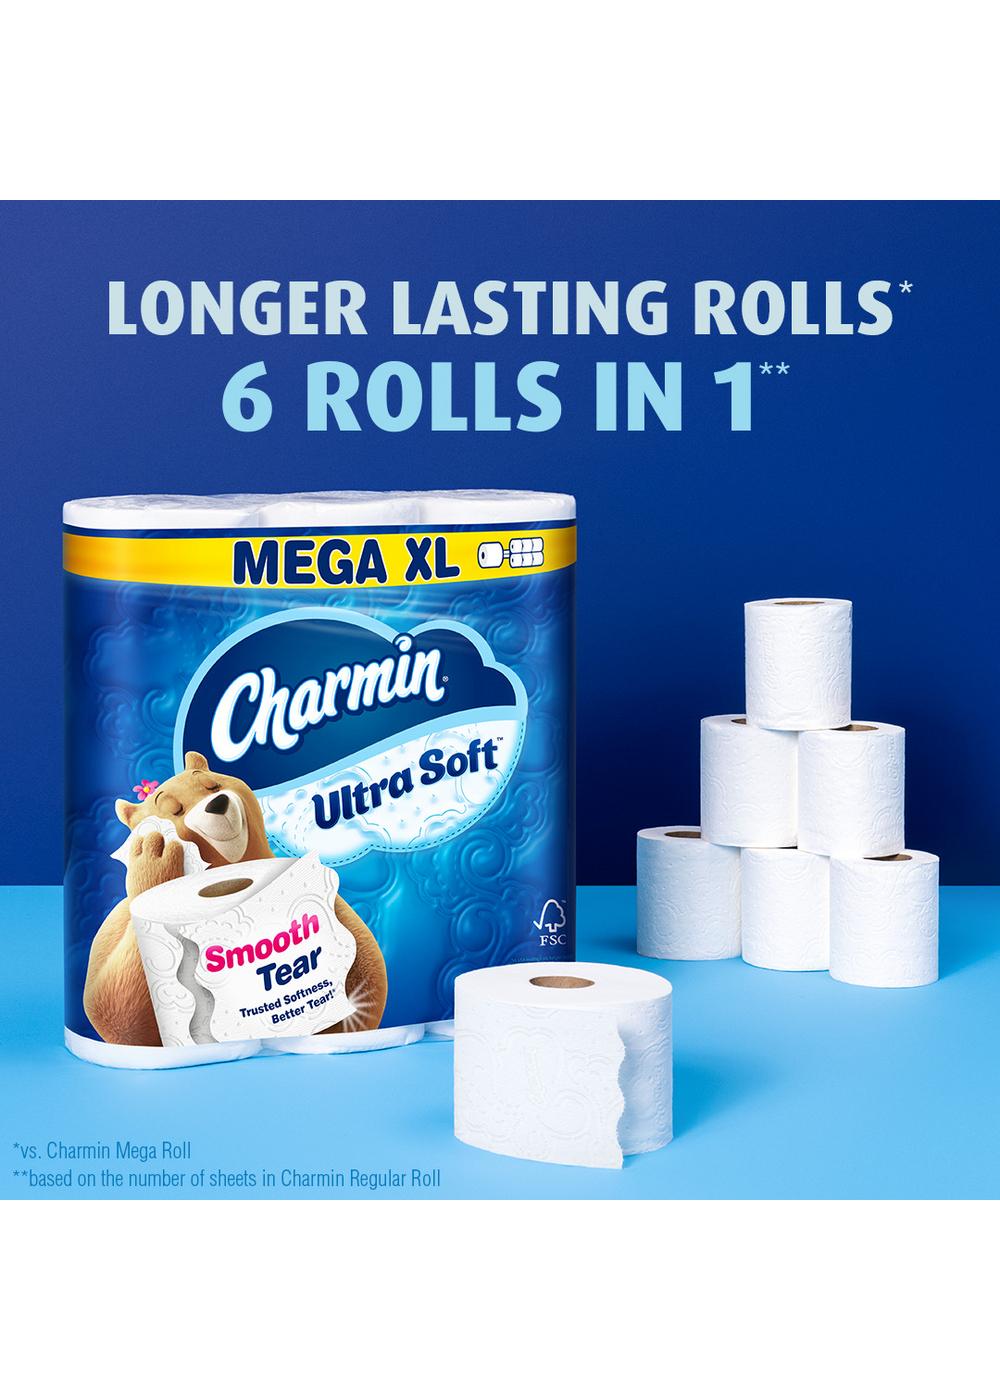 Charmin Ultra Soft Smooth Tear Toilet Paper; image 5 of 7